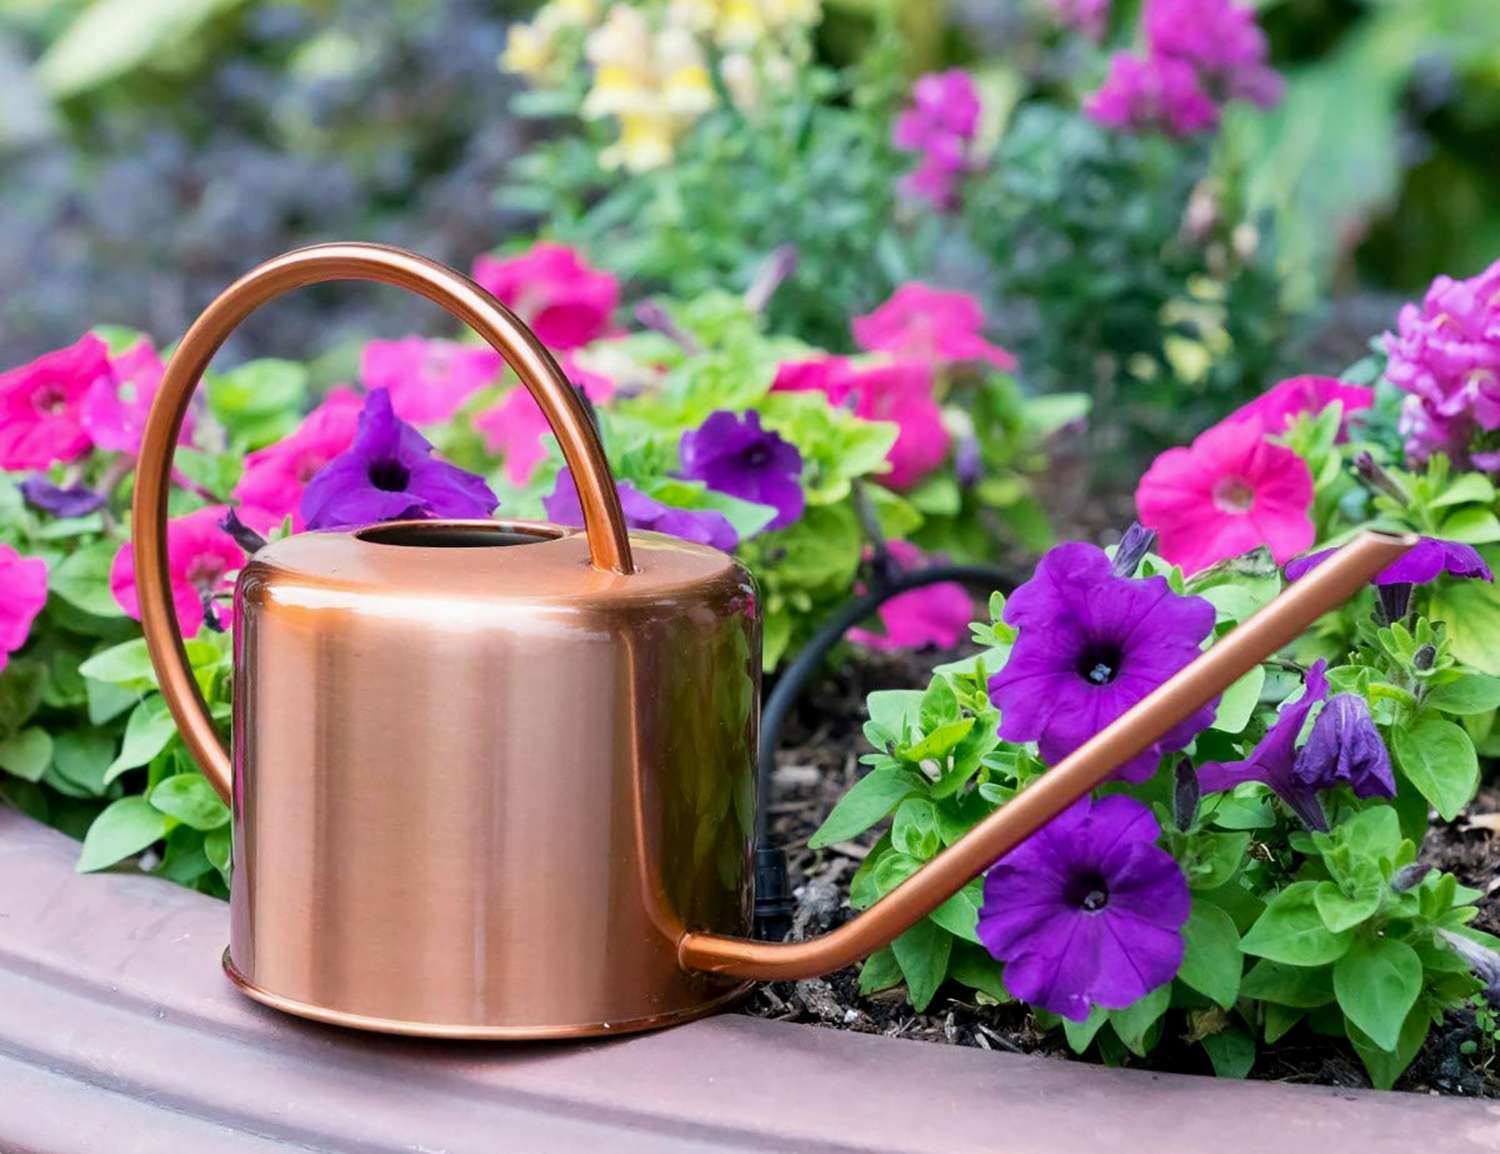 3PCS COLORFUL GARDEN METAL FLOWER KETTLE SMALL WATER SPRAYING POT WATERING CAN 